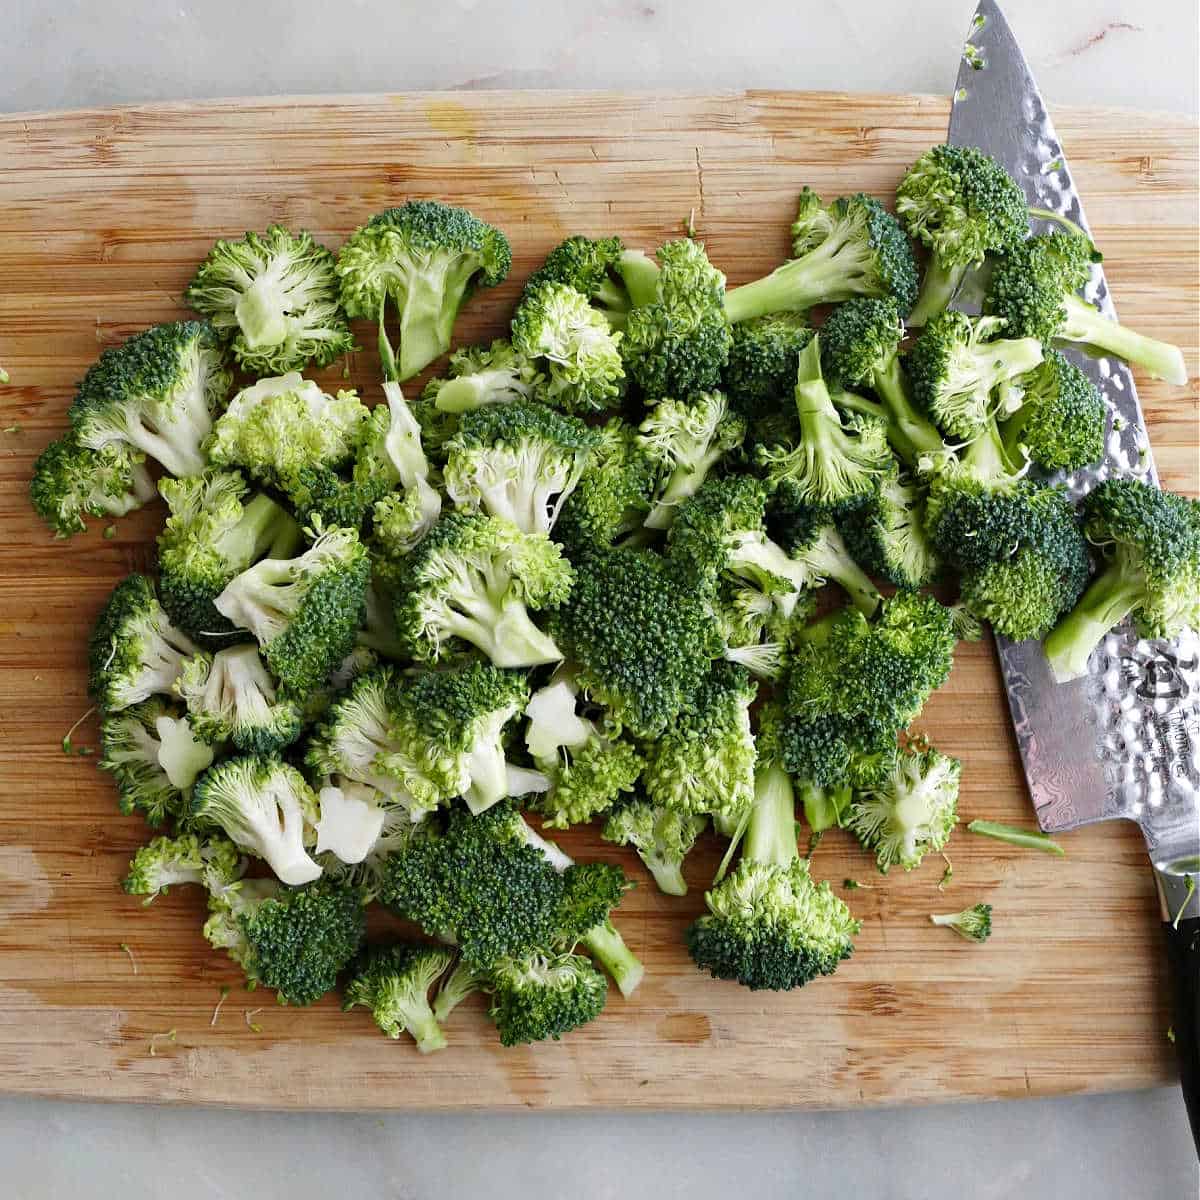 broccoli cut into florets on a cutting board with knife